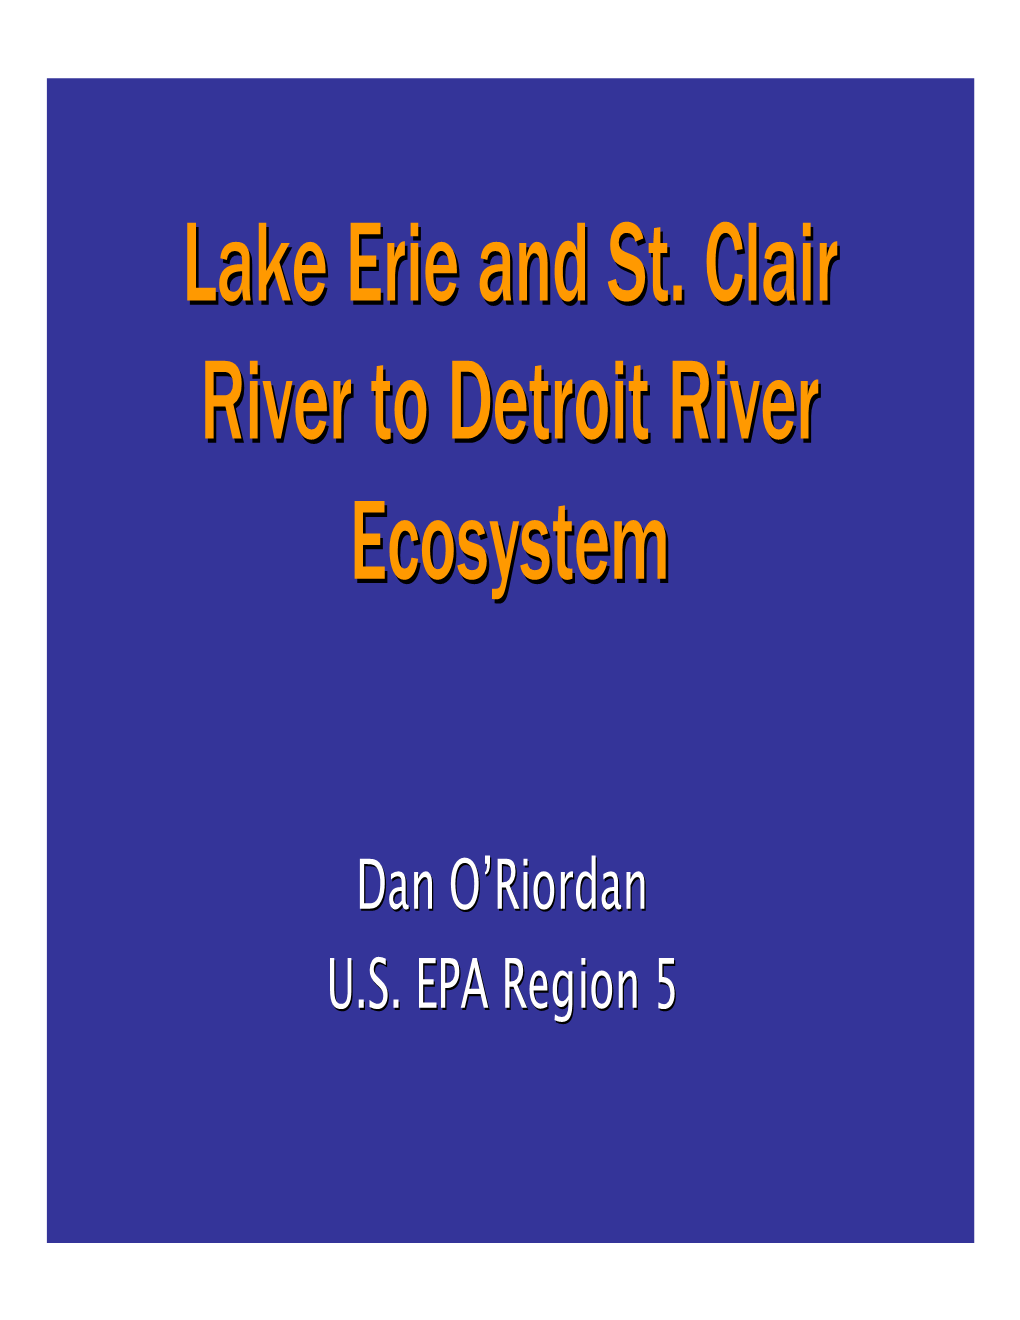 Lake Erie and St. Clair River to Detroit River Ecosystem